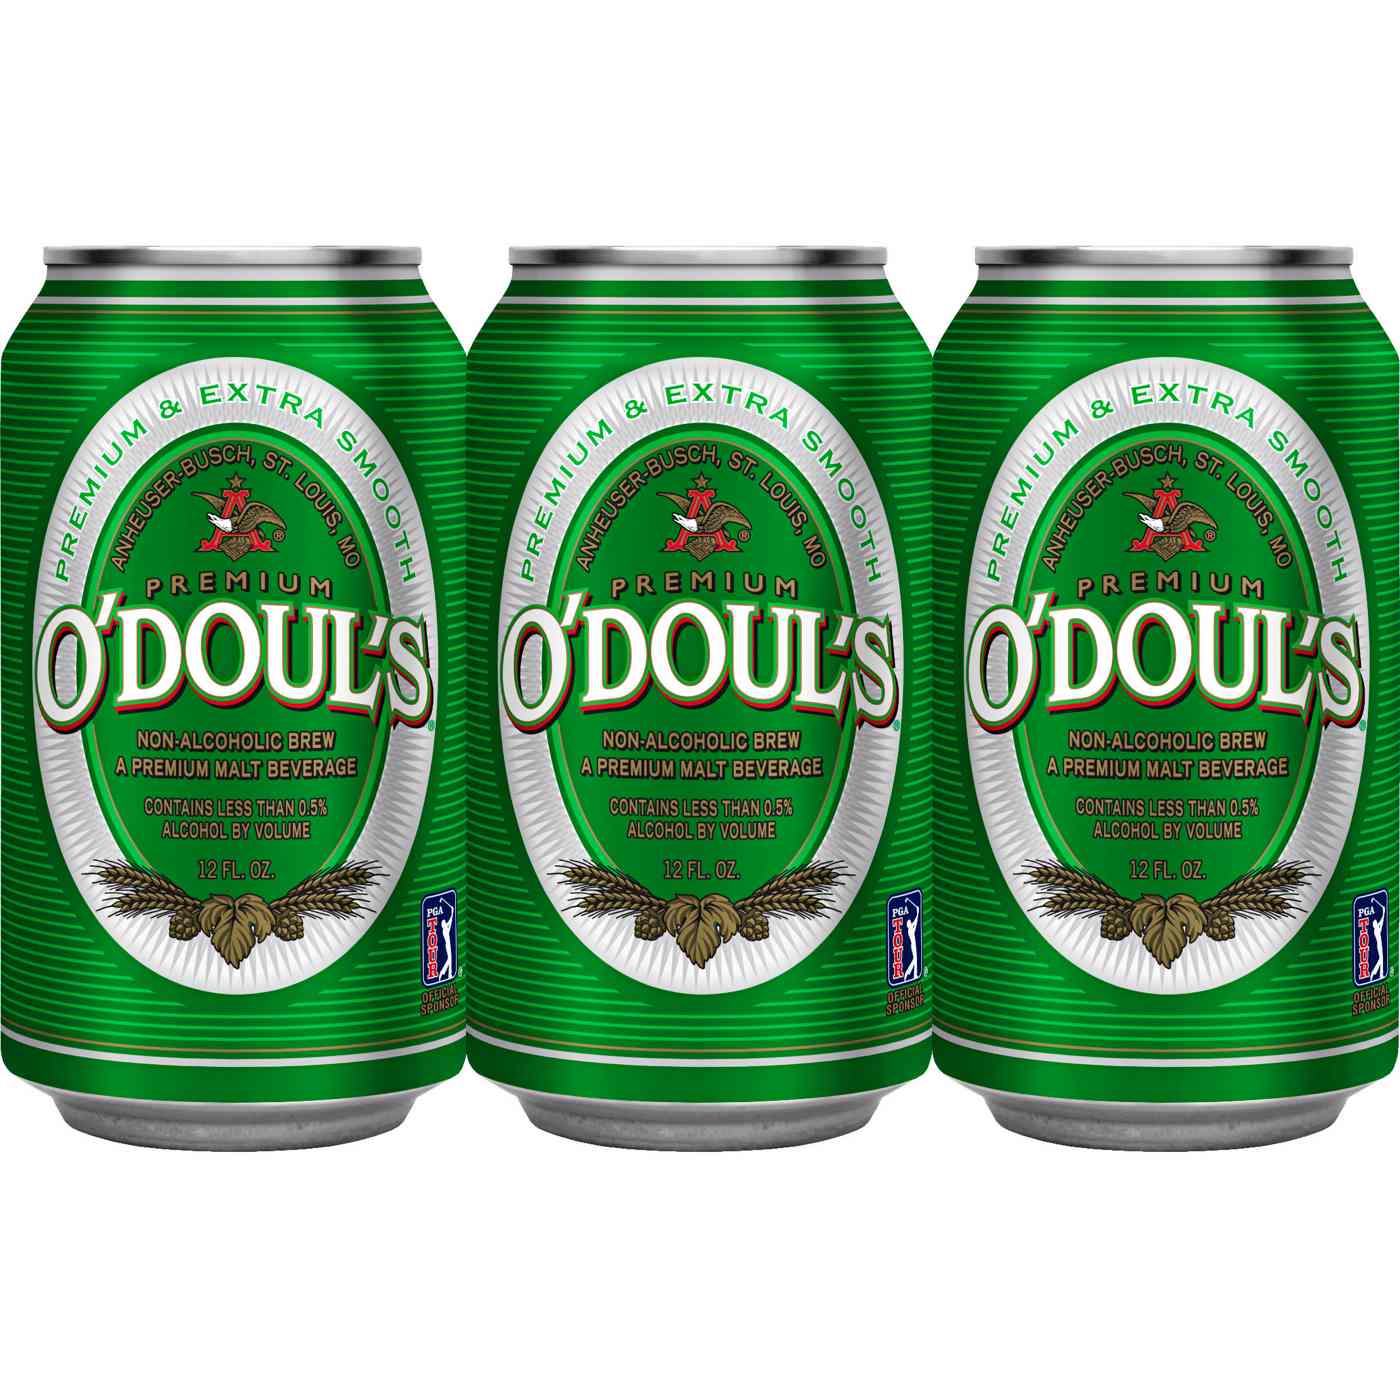 O'Douls Non-Alcoholic Beer 6 pk Cans; image 2 of 2